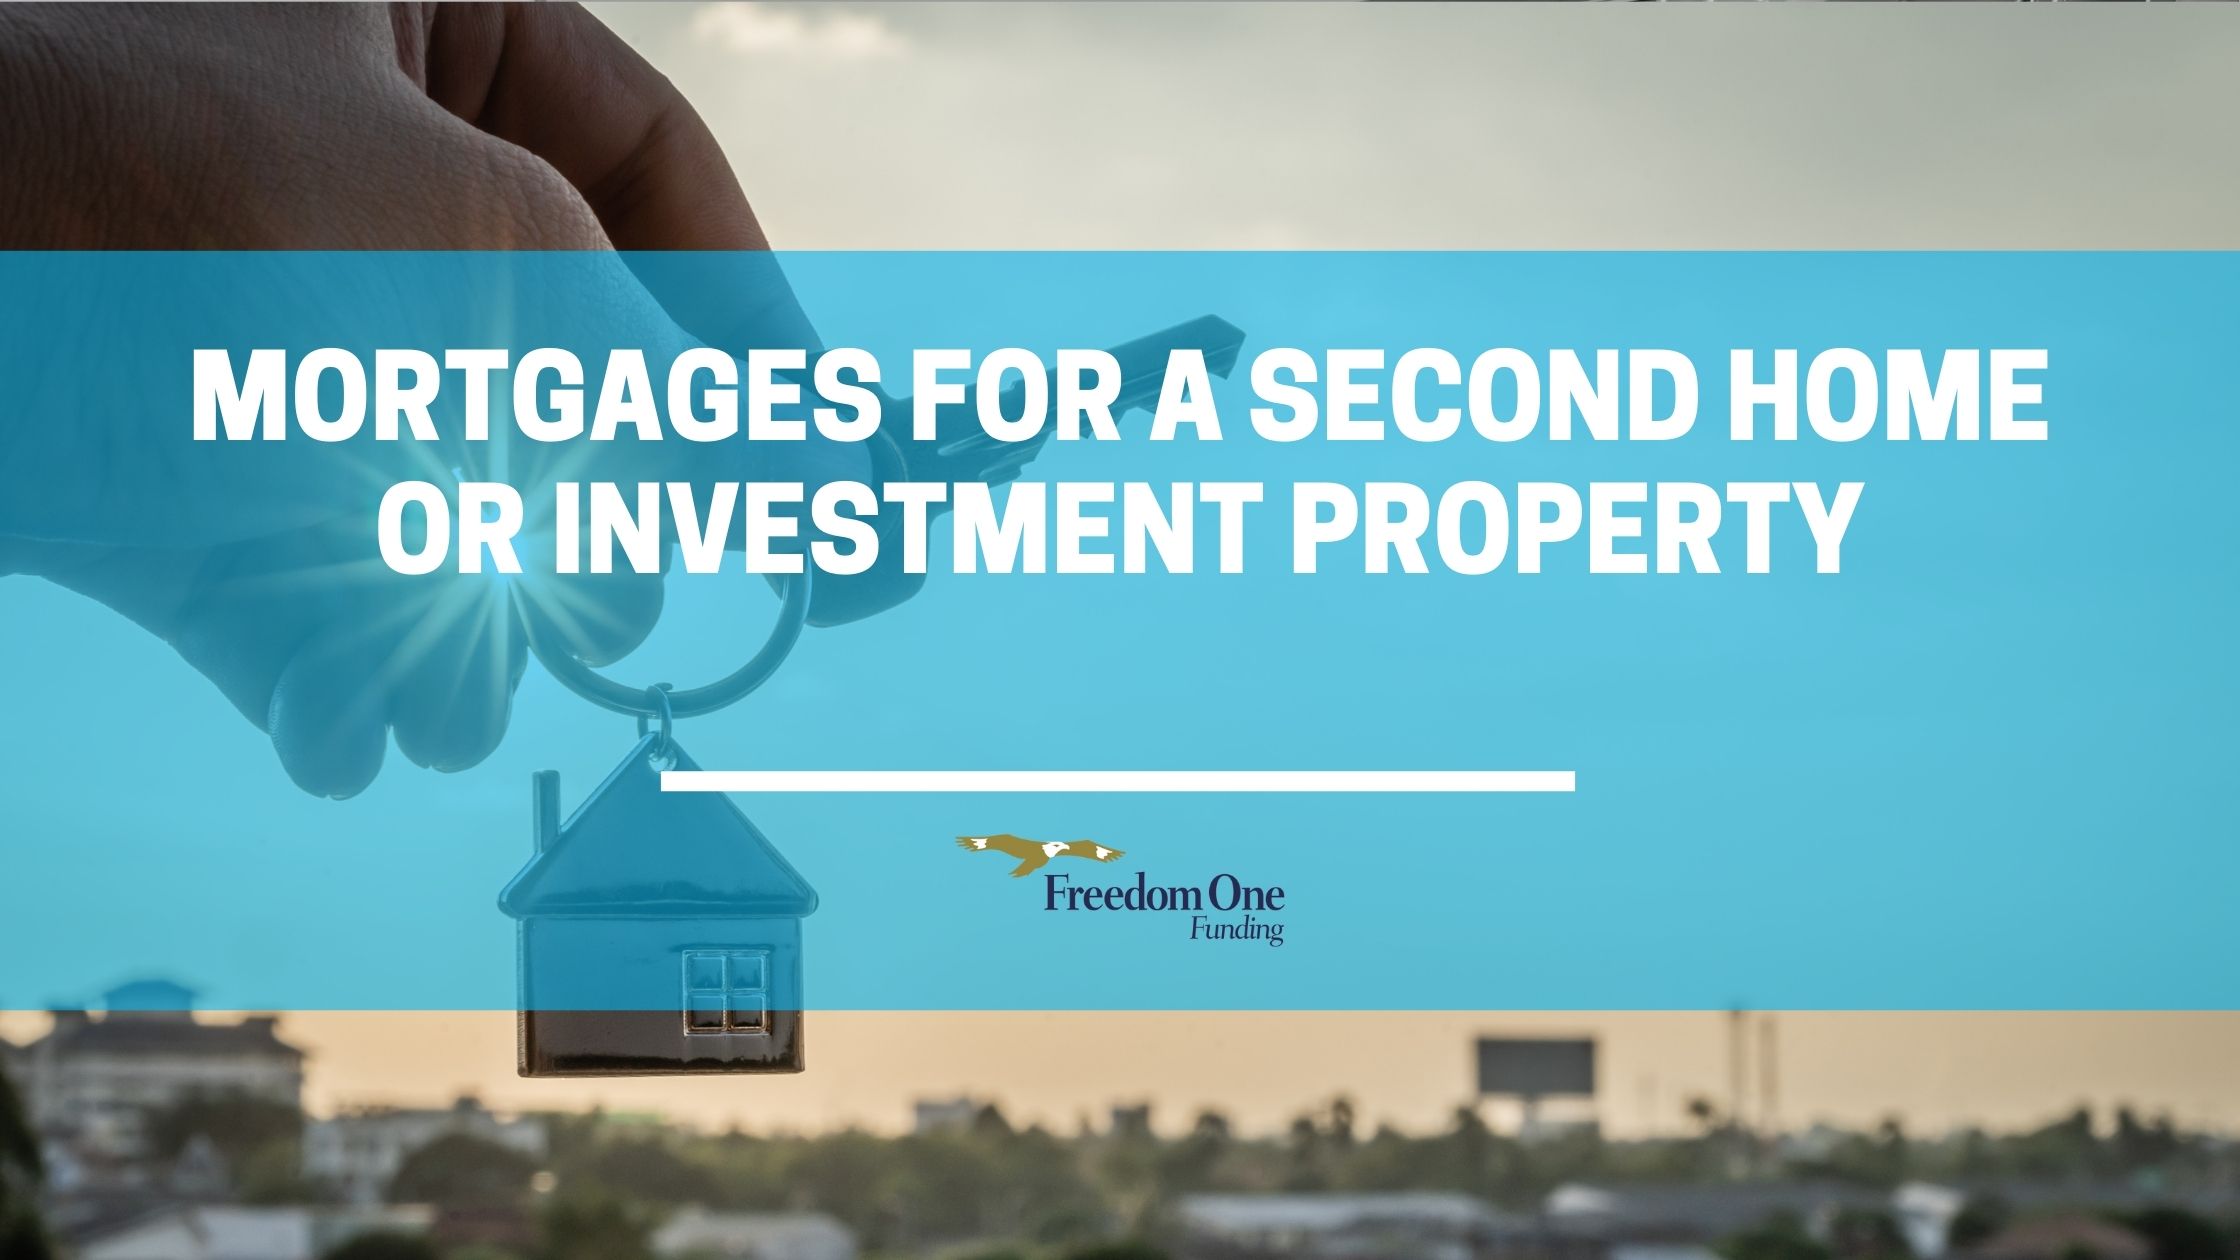 Mortgages for a Second Home or Investment Property